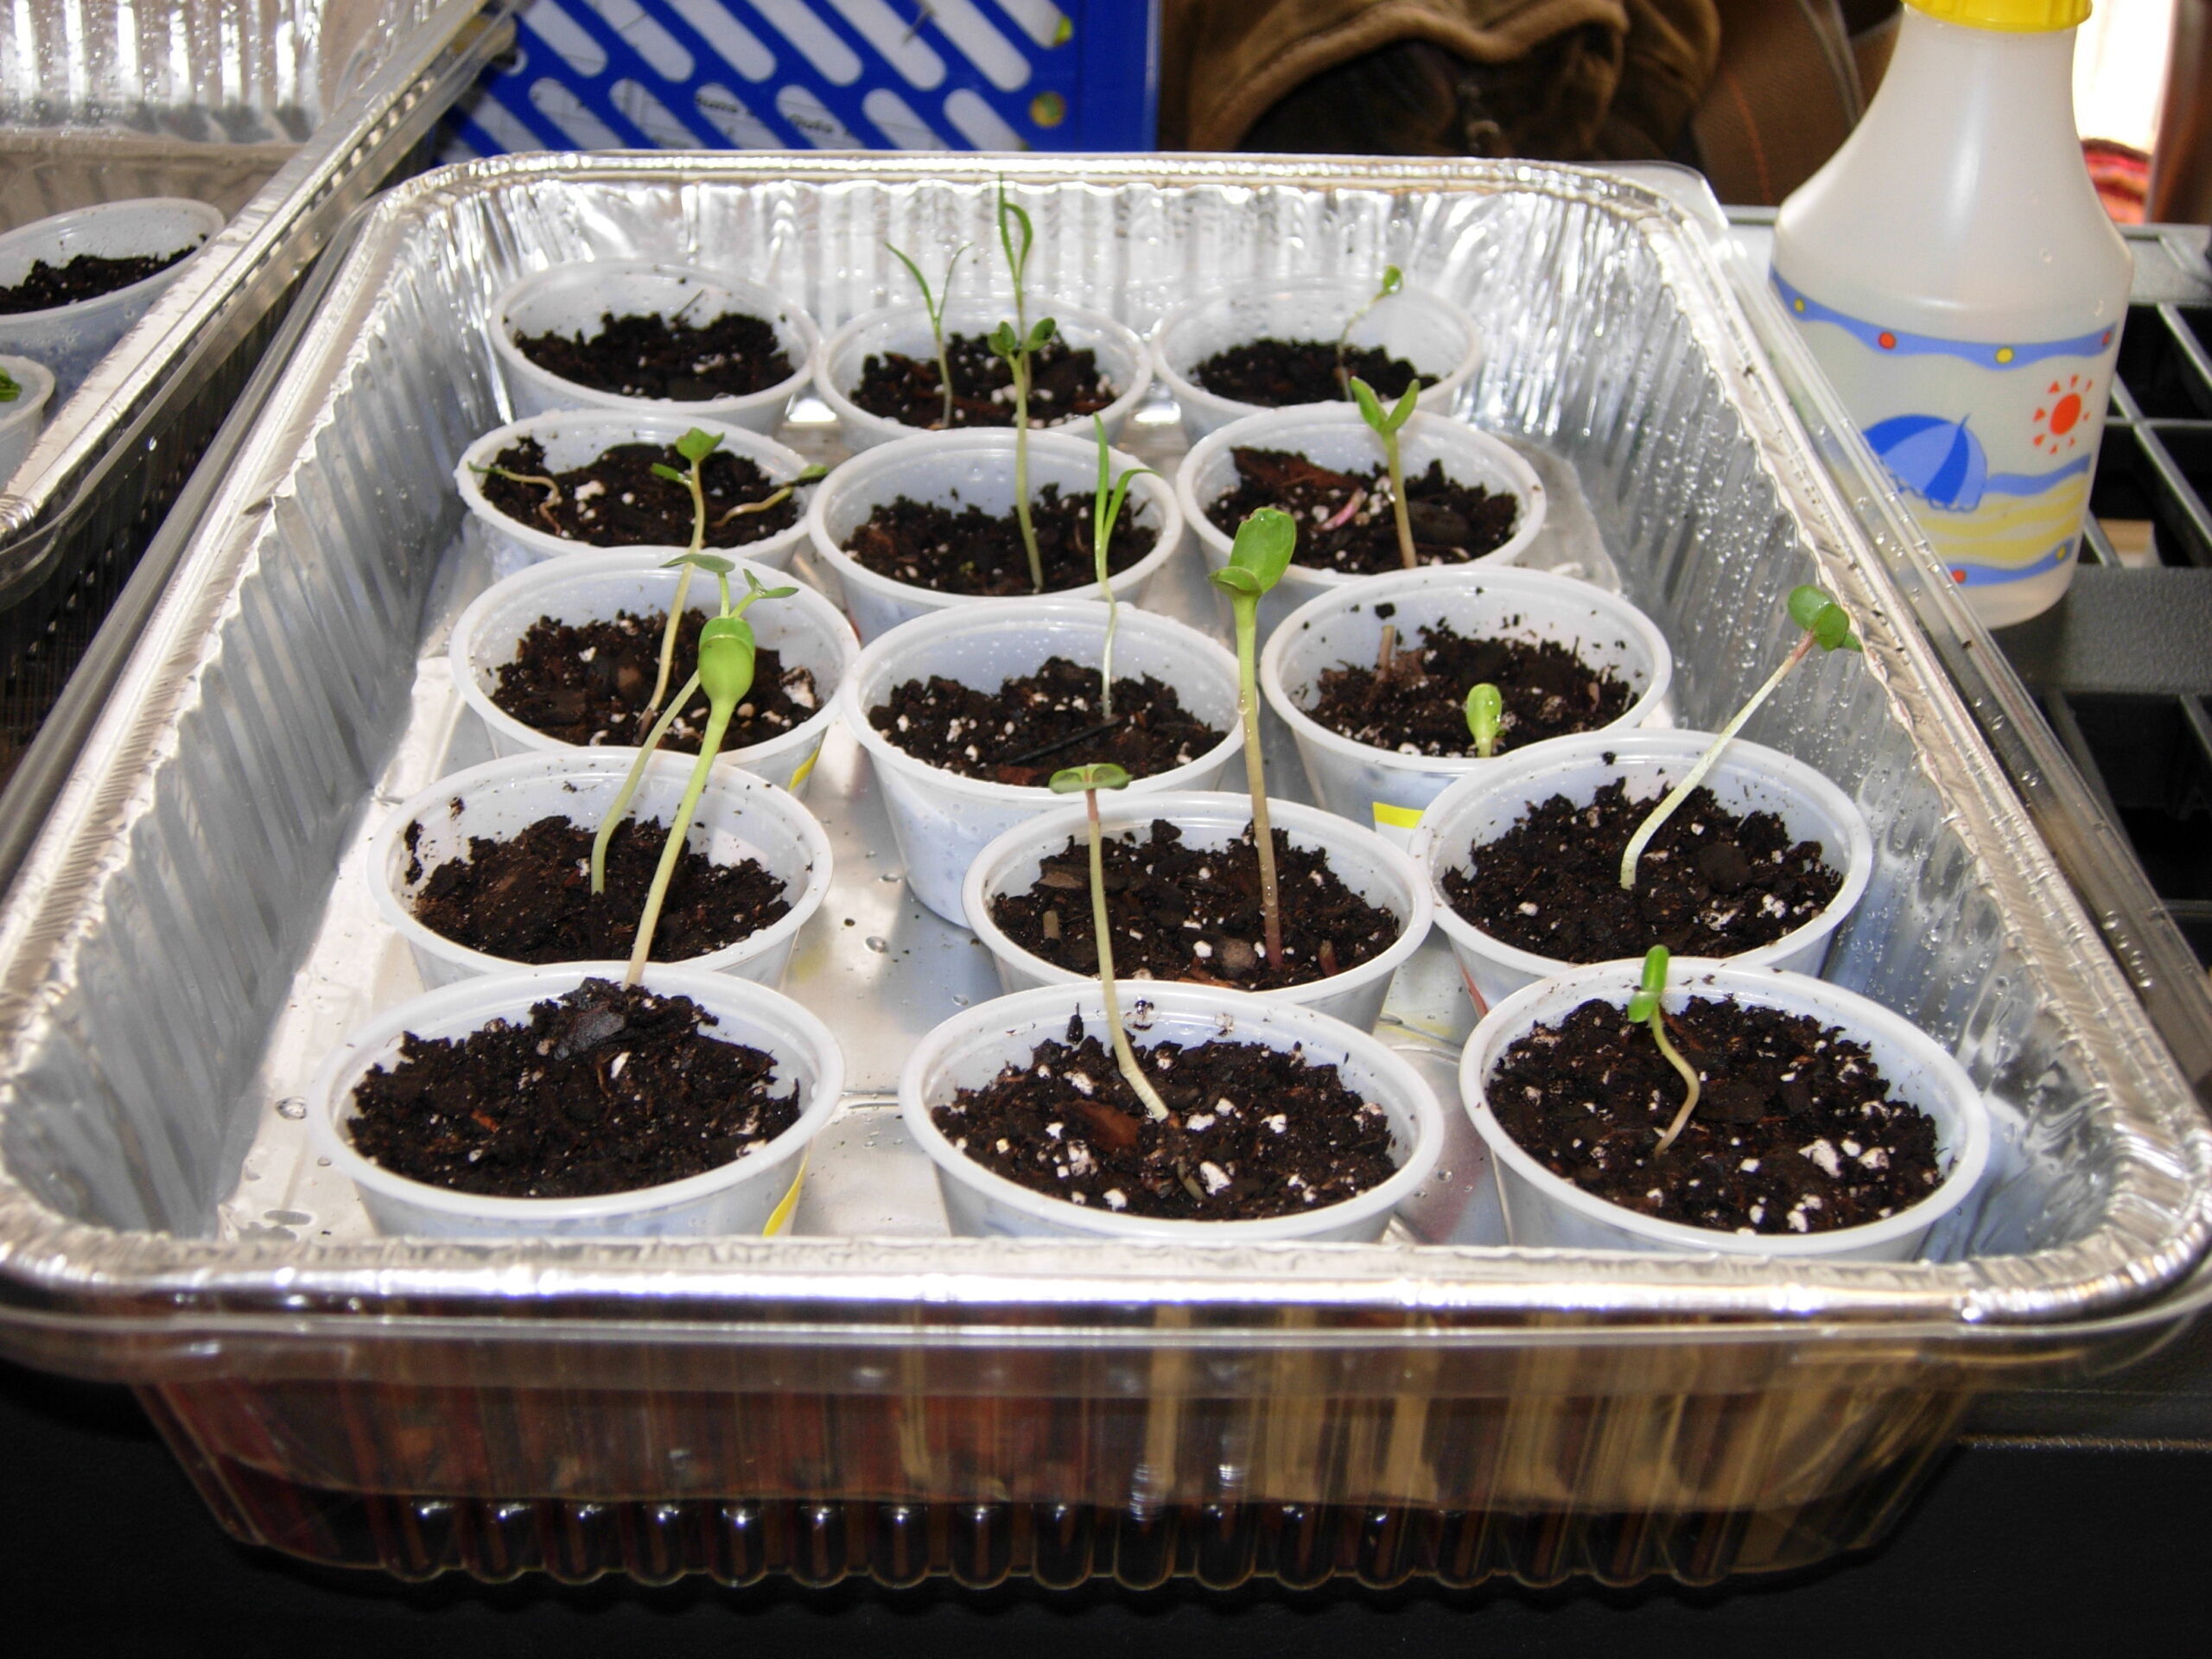 starting seeds indoors using cups in a metal tray